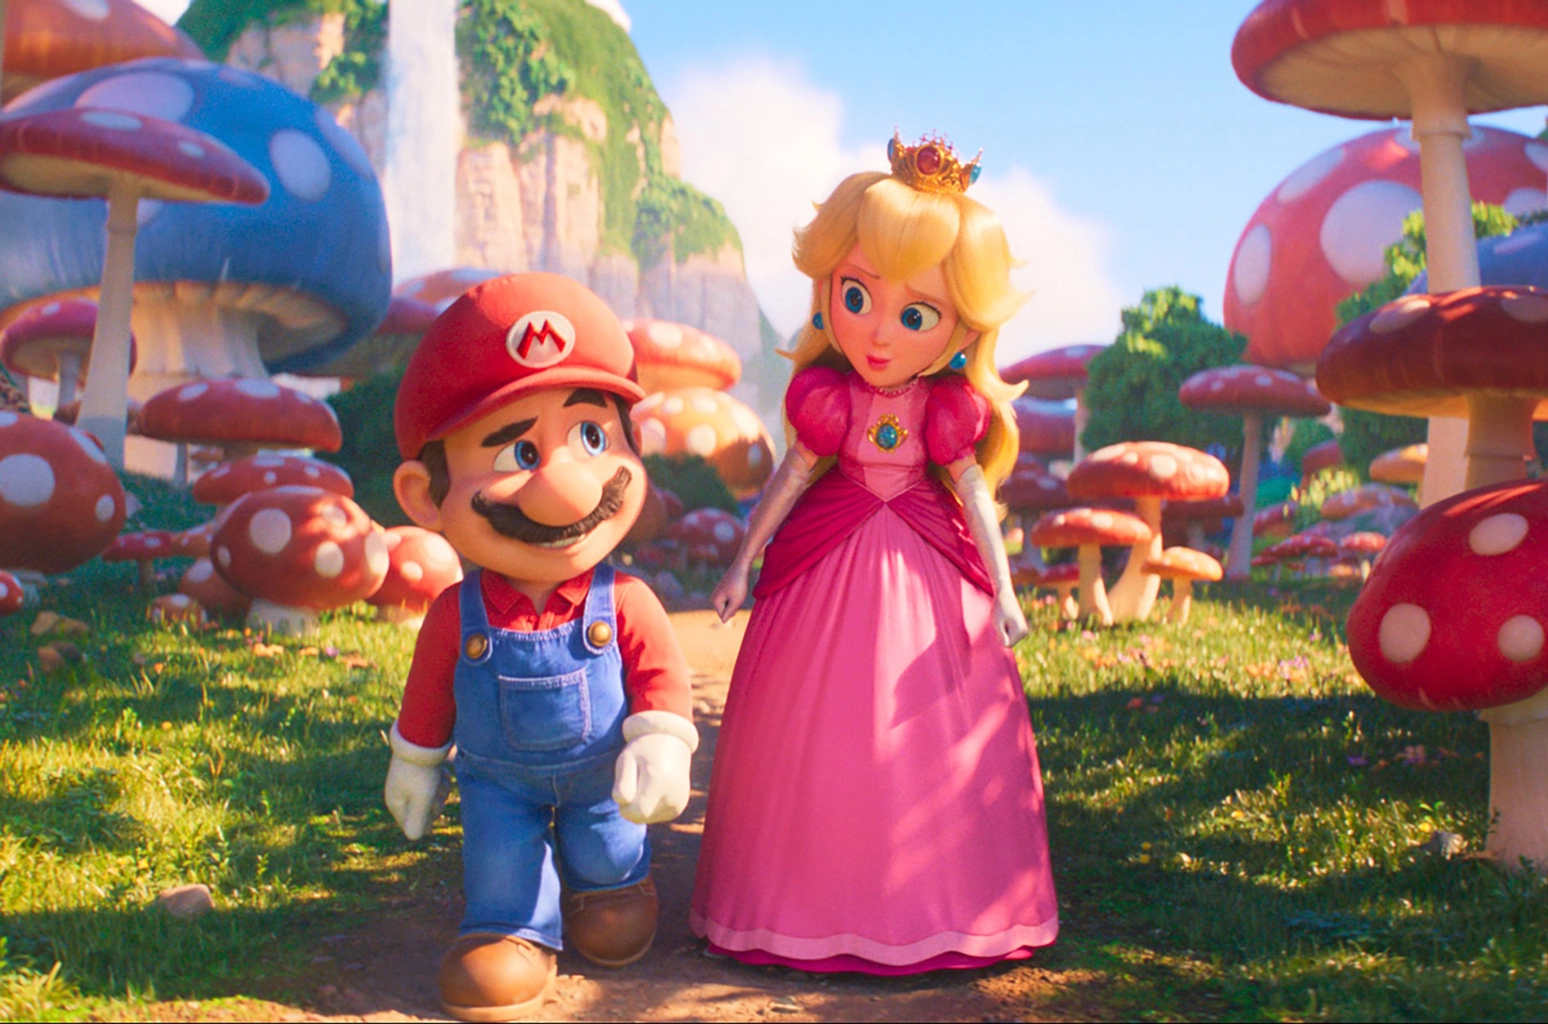 Super Mario Bros. becomes the second highest-grossing animated film in history